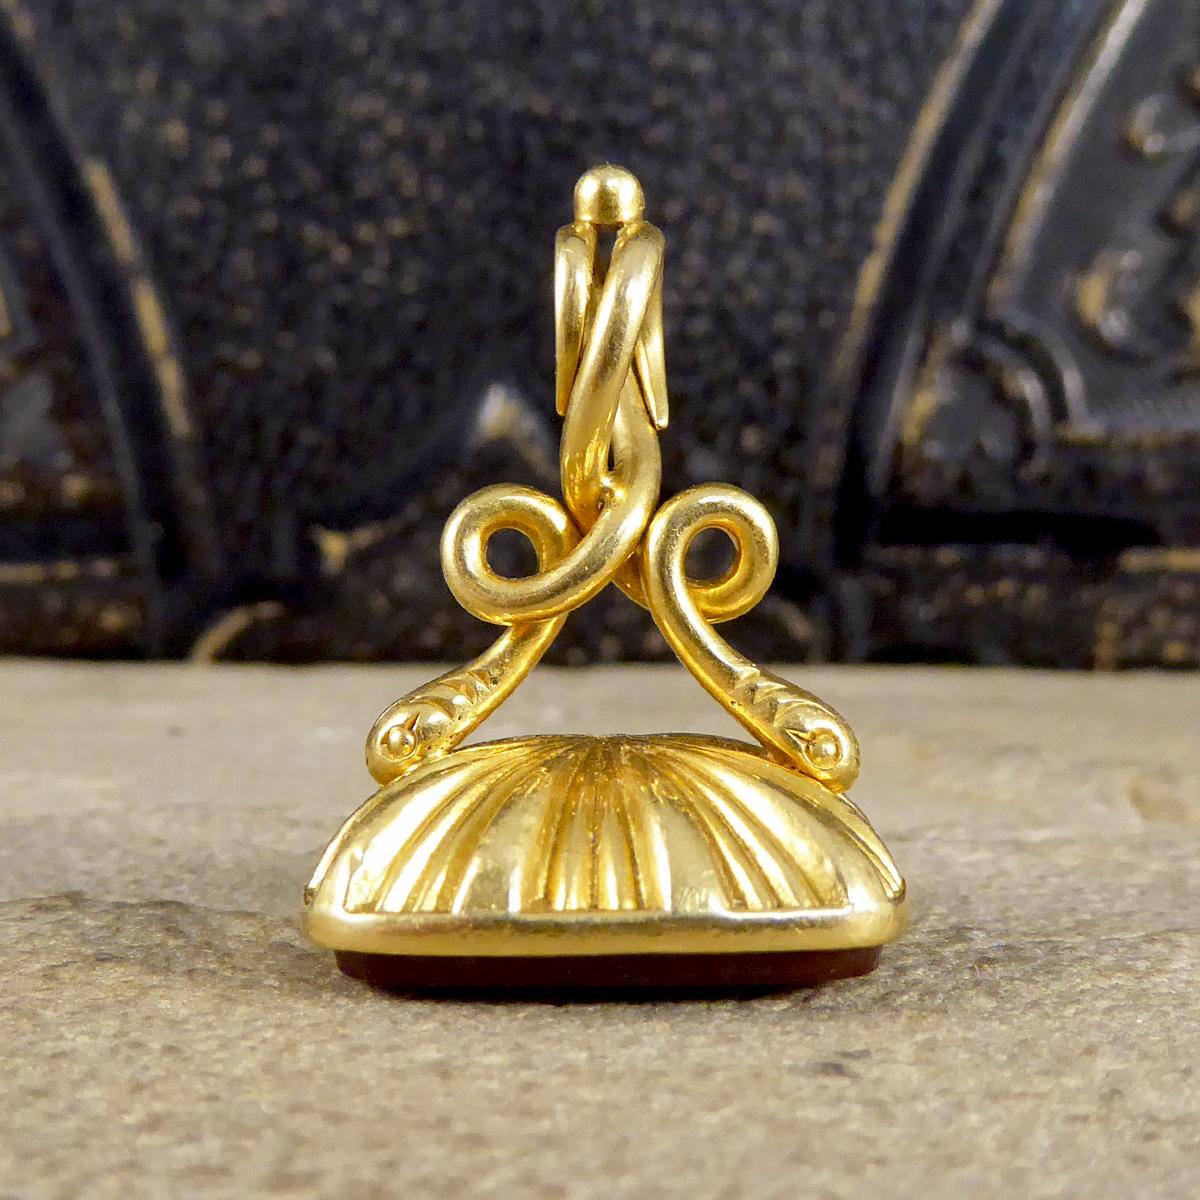 Traditionally found attached to a gentleman's watch chain, which are still worn to this day or hung from a chain as a necklace. This unique antique quality 18ct Yellow Gold fob pendant is set with Agate dating from the Victorian era with clear 18ct